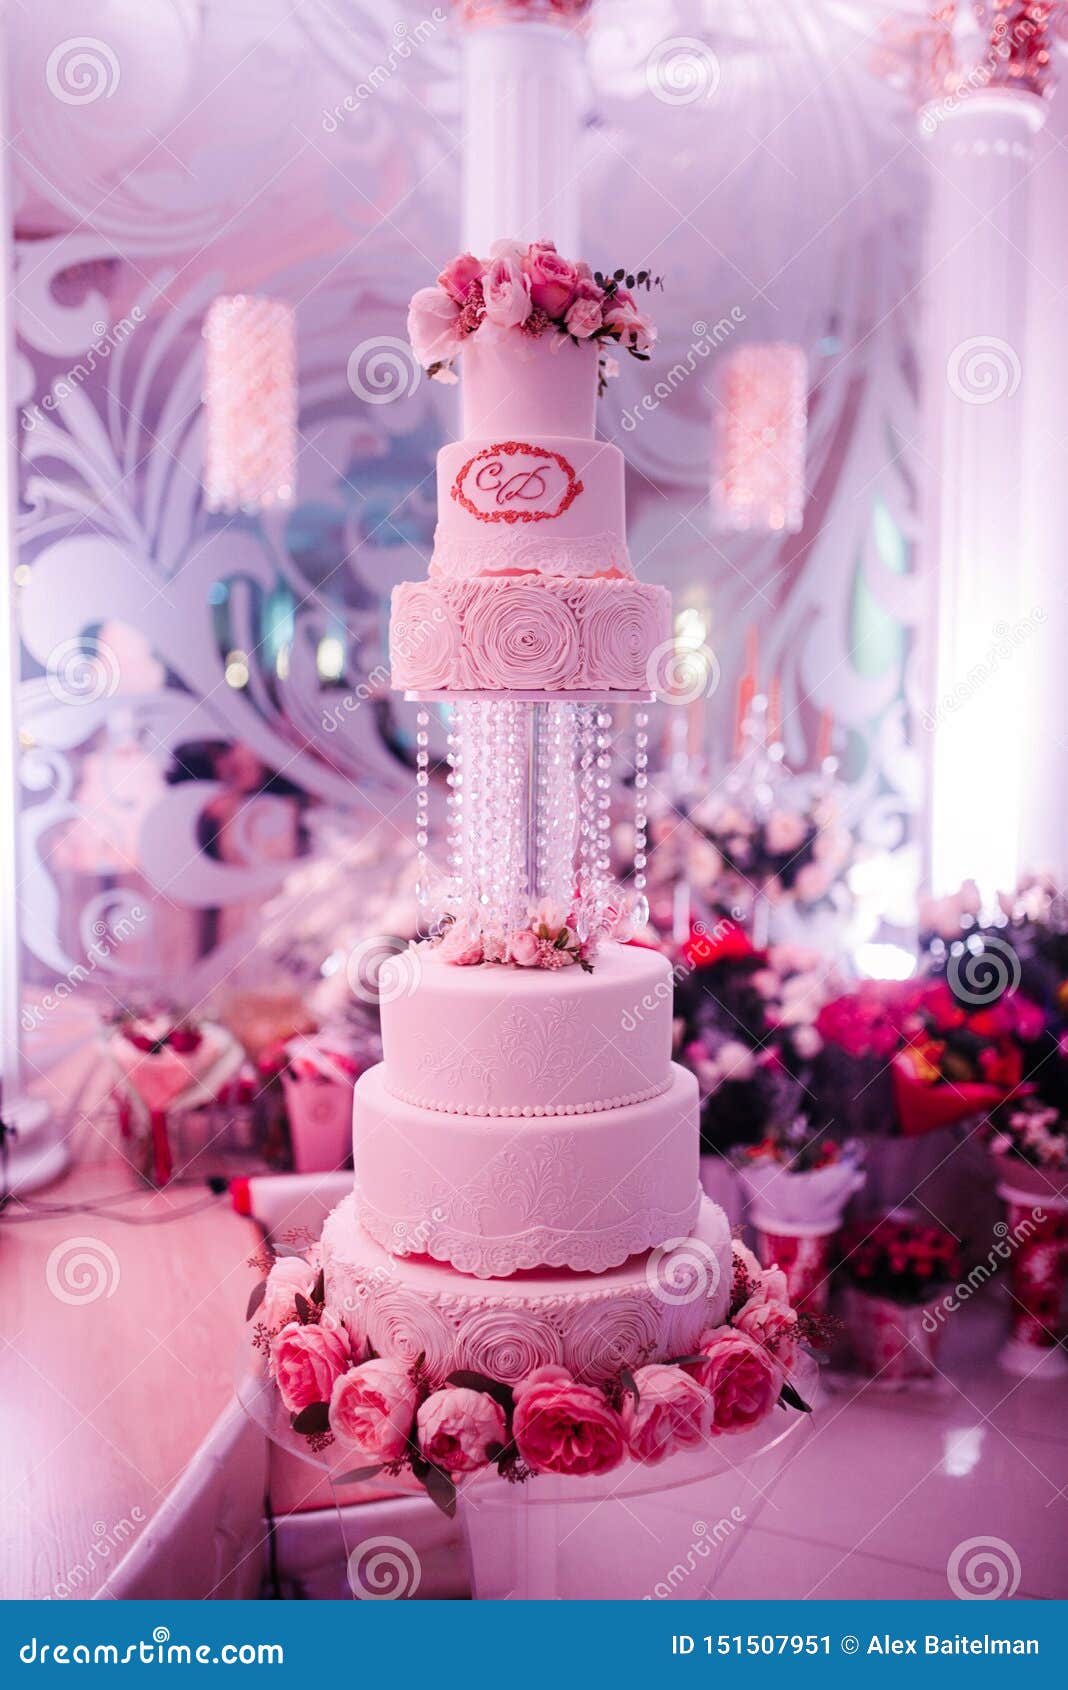 Big White Wedding Cake with Fruit is on the Table Stock Image ...